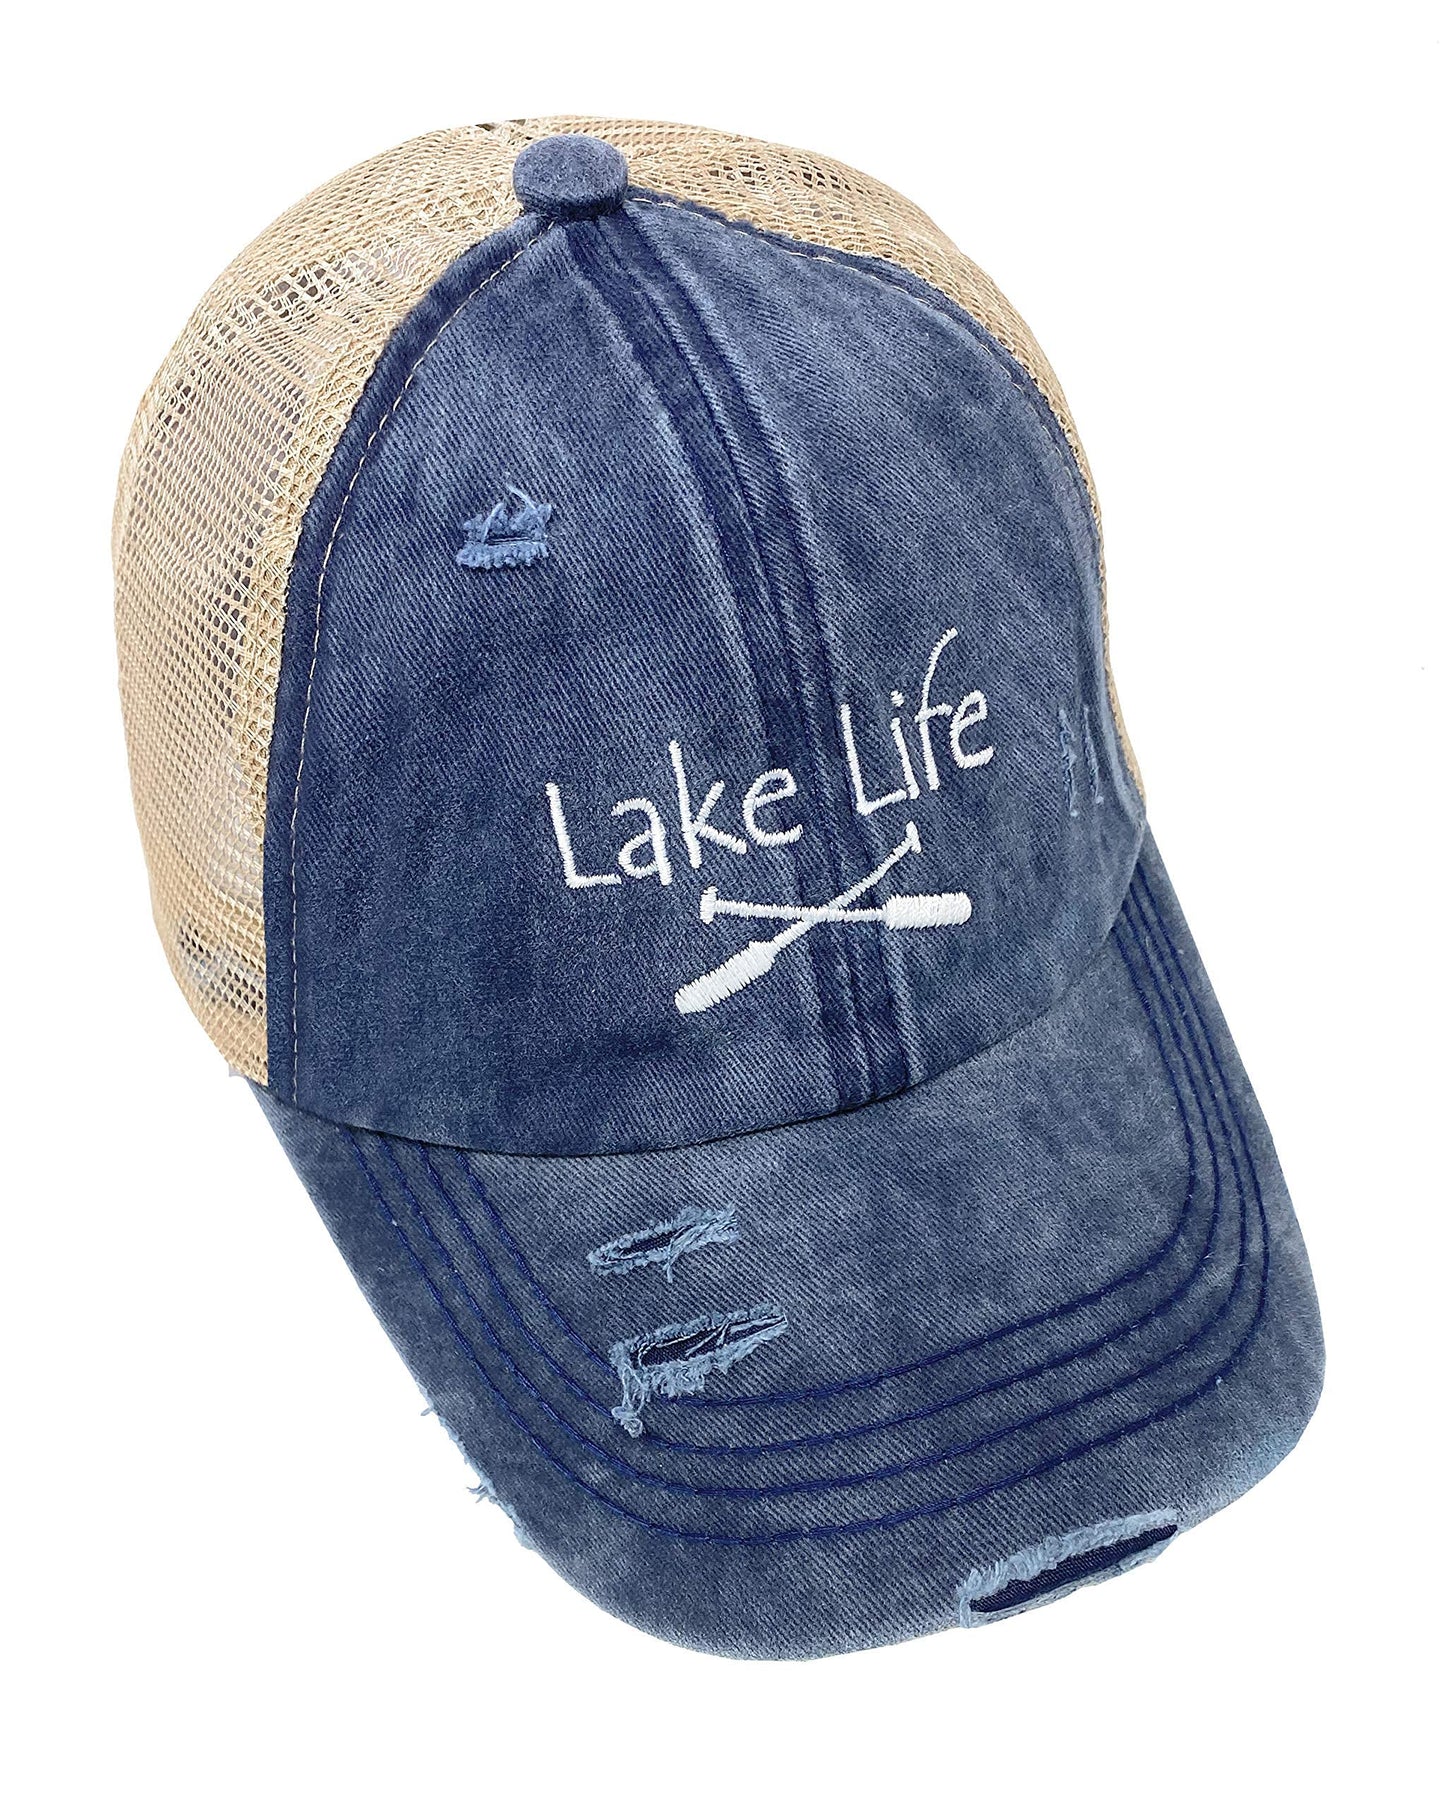 Lake Life Criss Cross Ponytail Hat by Funky Junque